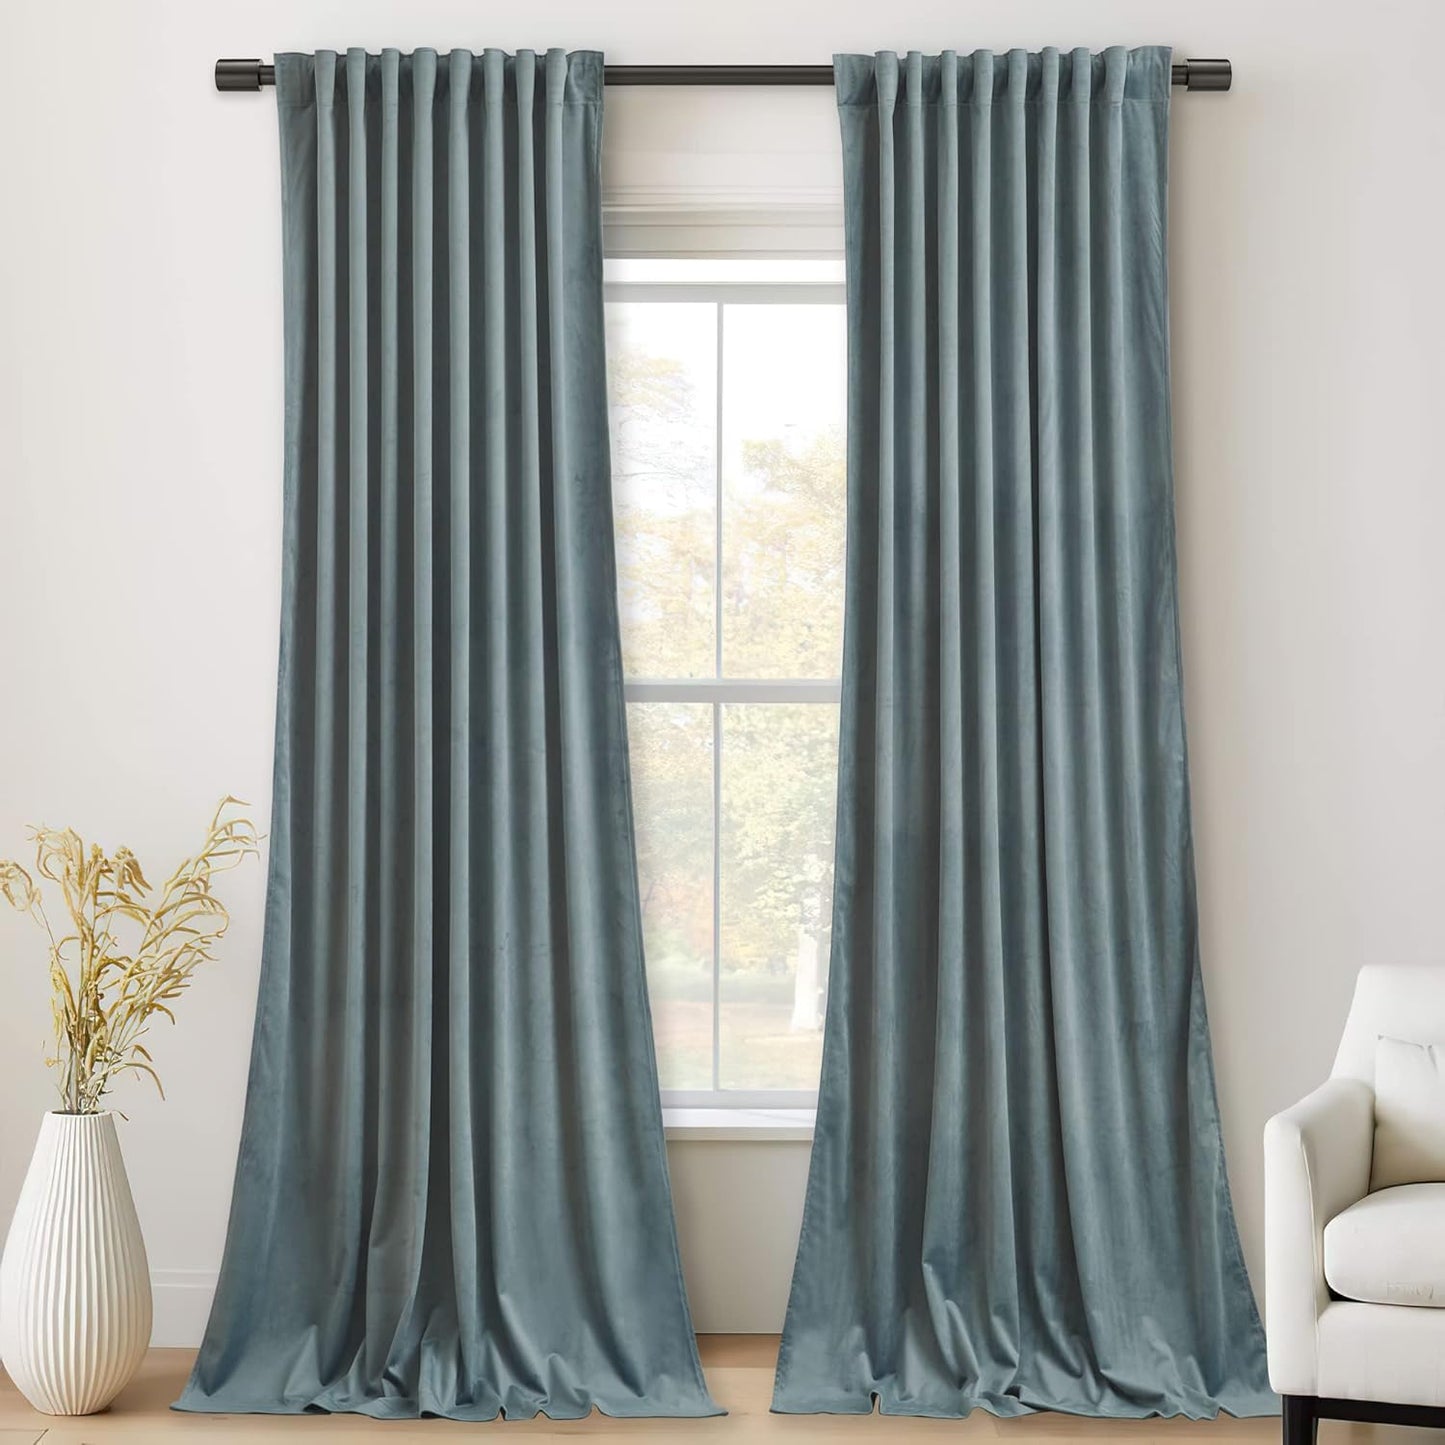 Stangh Velvet Curtains 84 Inches - Gold Brown Blackout Thermal Insulated Window Drapes for Living Room, Back Tab Luxury Home Decor Curtains for Bedroom Sliding Door, W52 X L84, 2 Panels  StangH Stone Blue W52" X L120" 